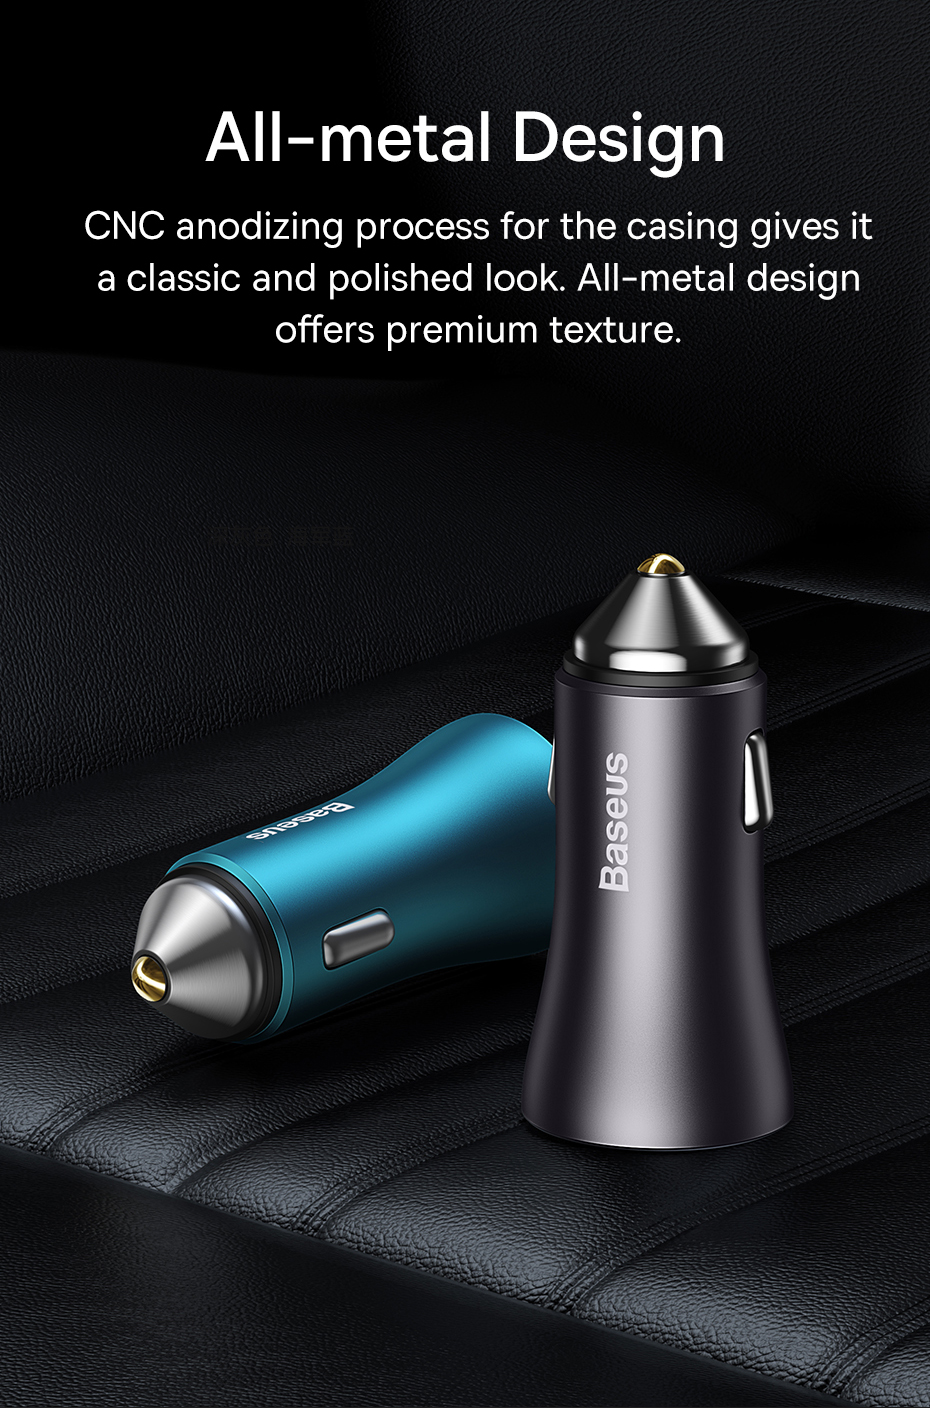 Baseus-60W-2-Port-USB-C-PD-Car-Charger-Dual-30W-QC30-PD30-Support-AFC-FCP-SCP-Fast-Charging-Metal-Ad-1938544-11